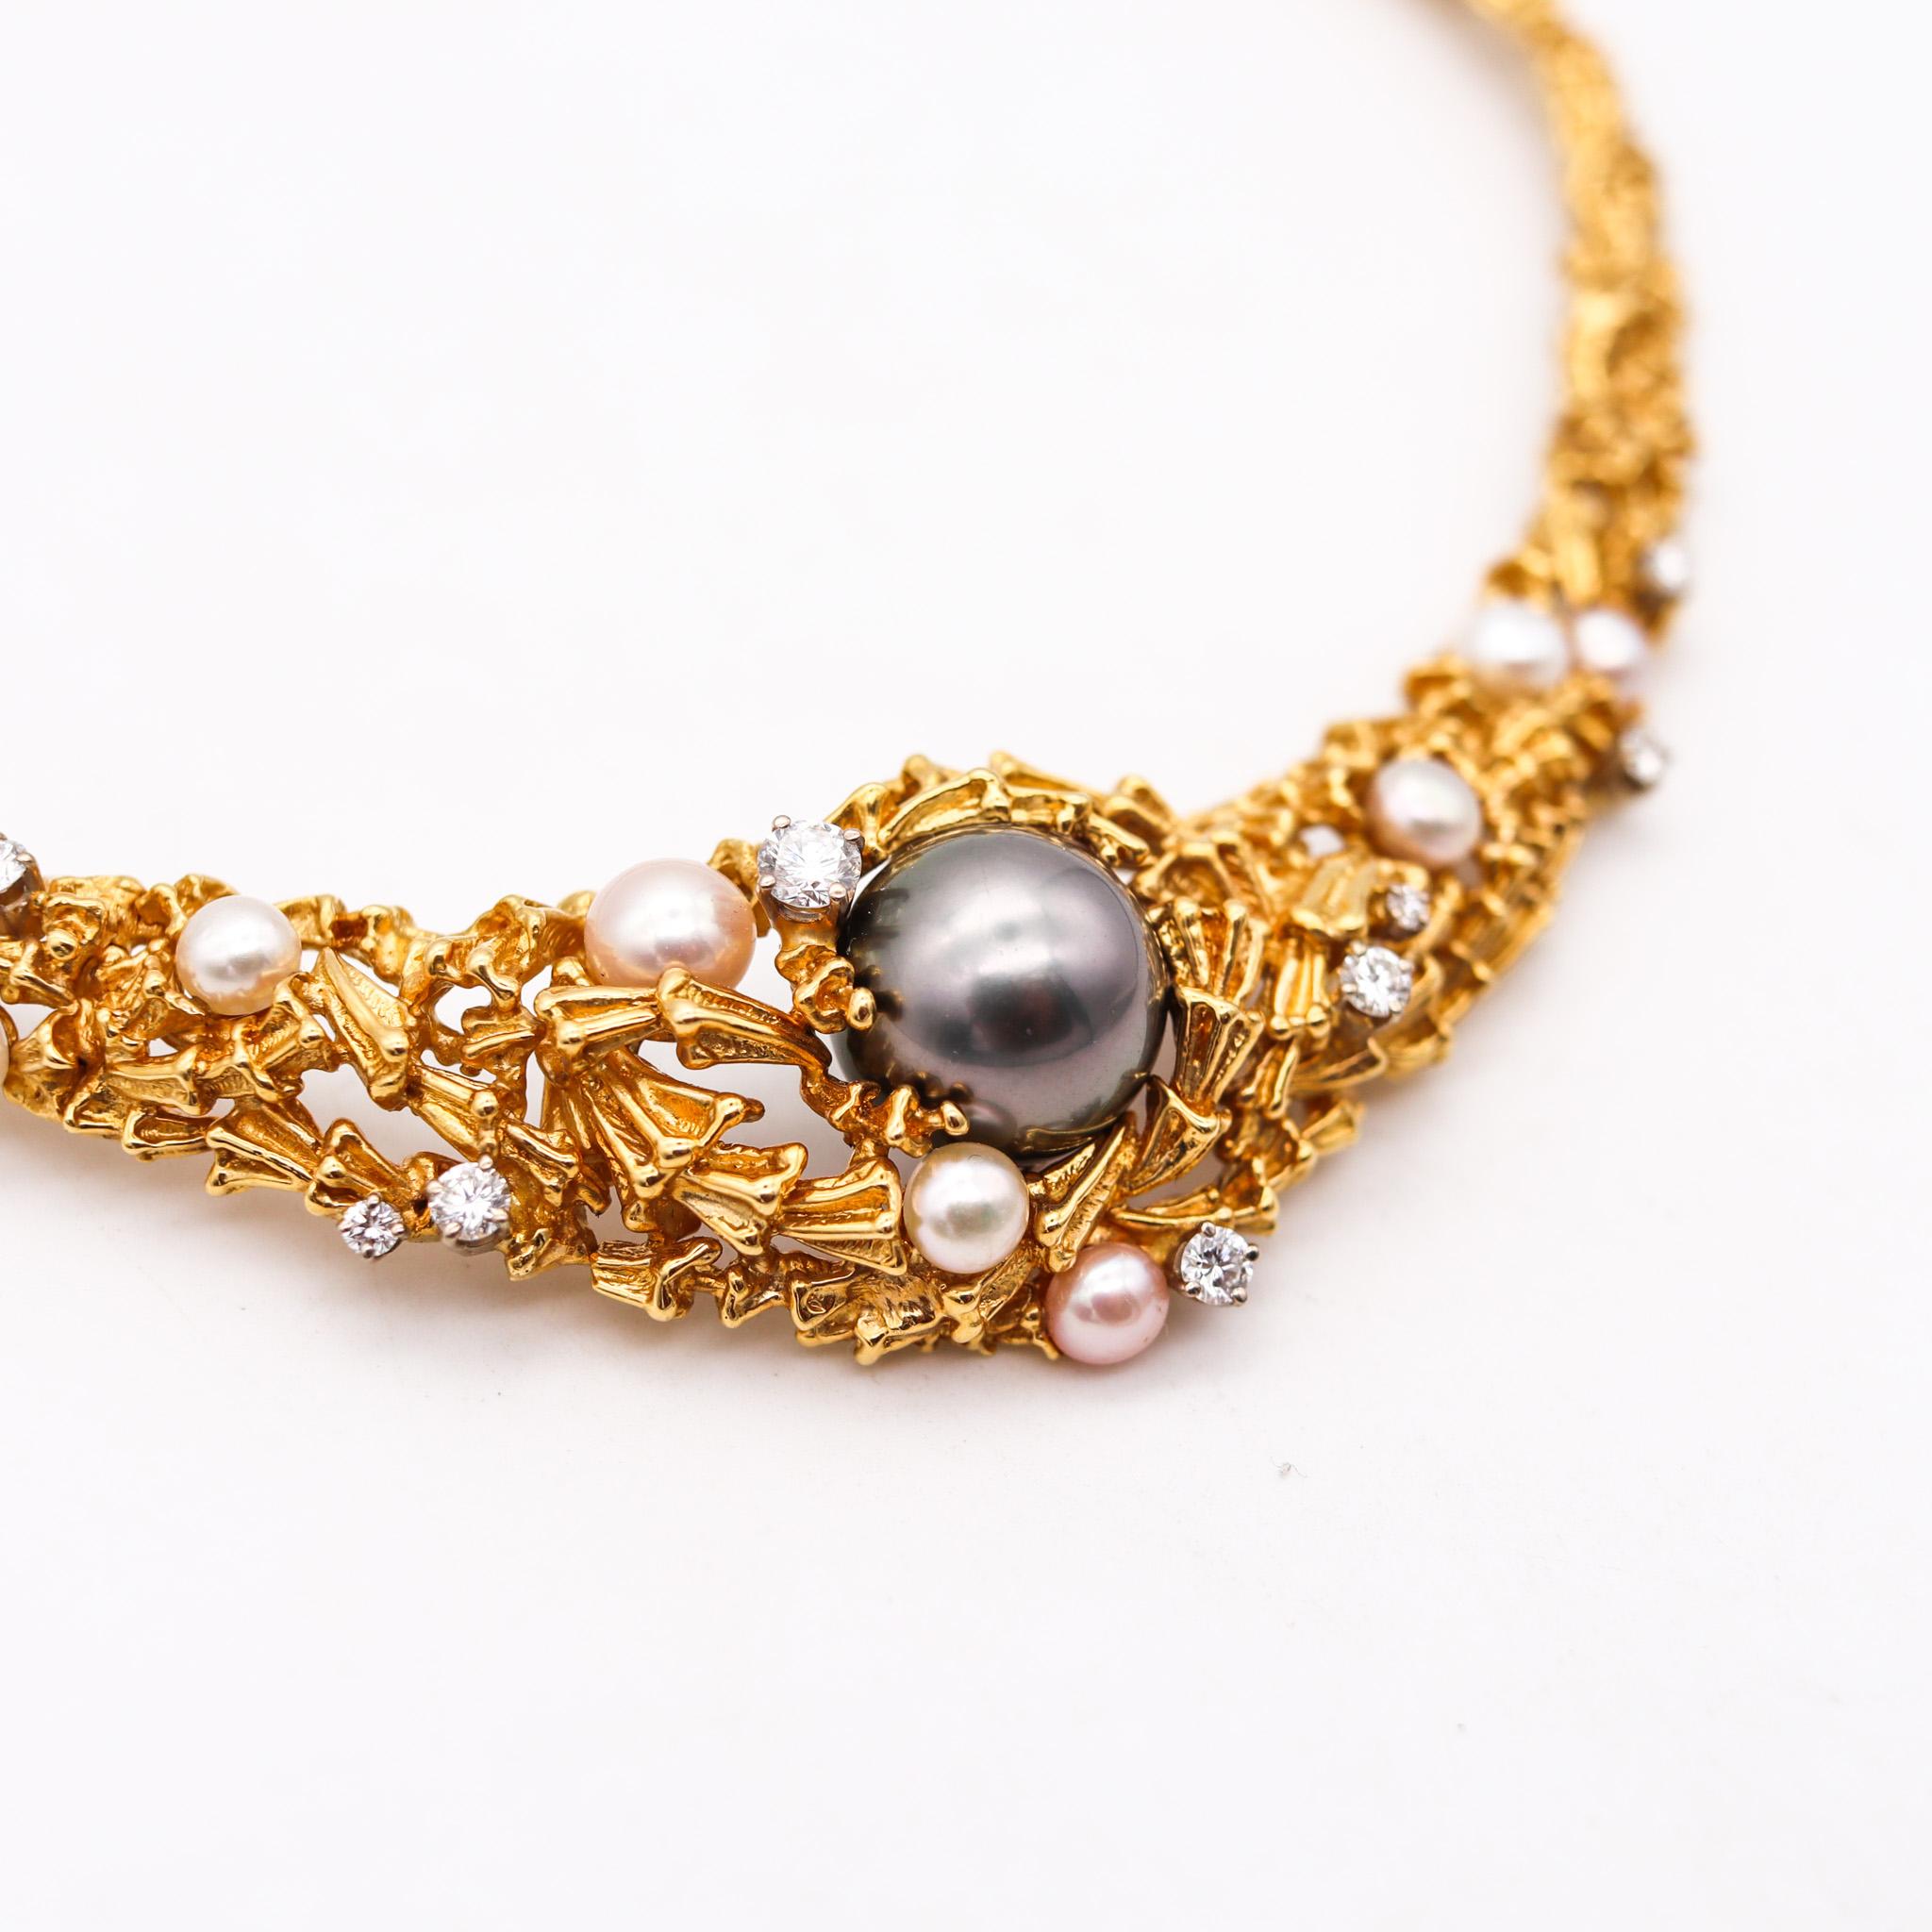 Modernist Gilbert Albert 1970 Organic Necklace In 18Kt Yellow Gold With Diamonds And Pearl For Sale